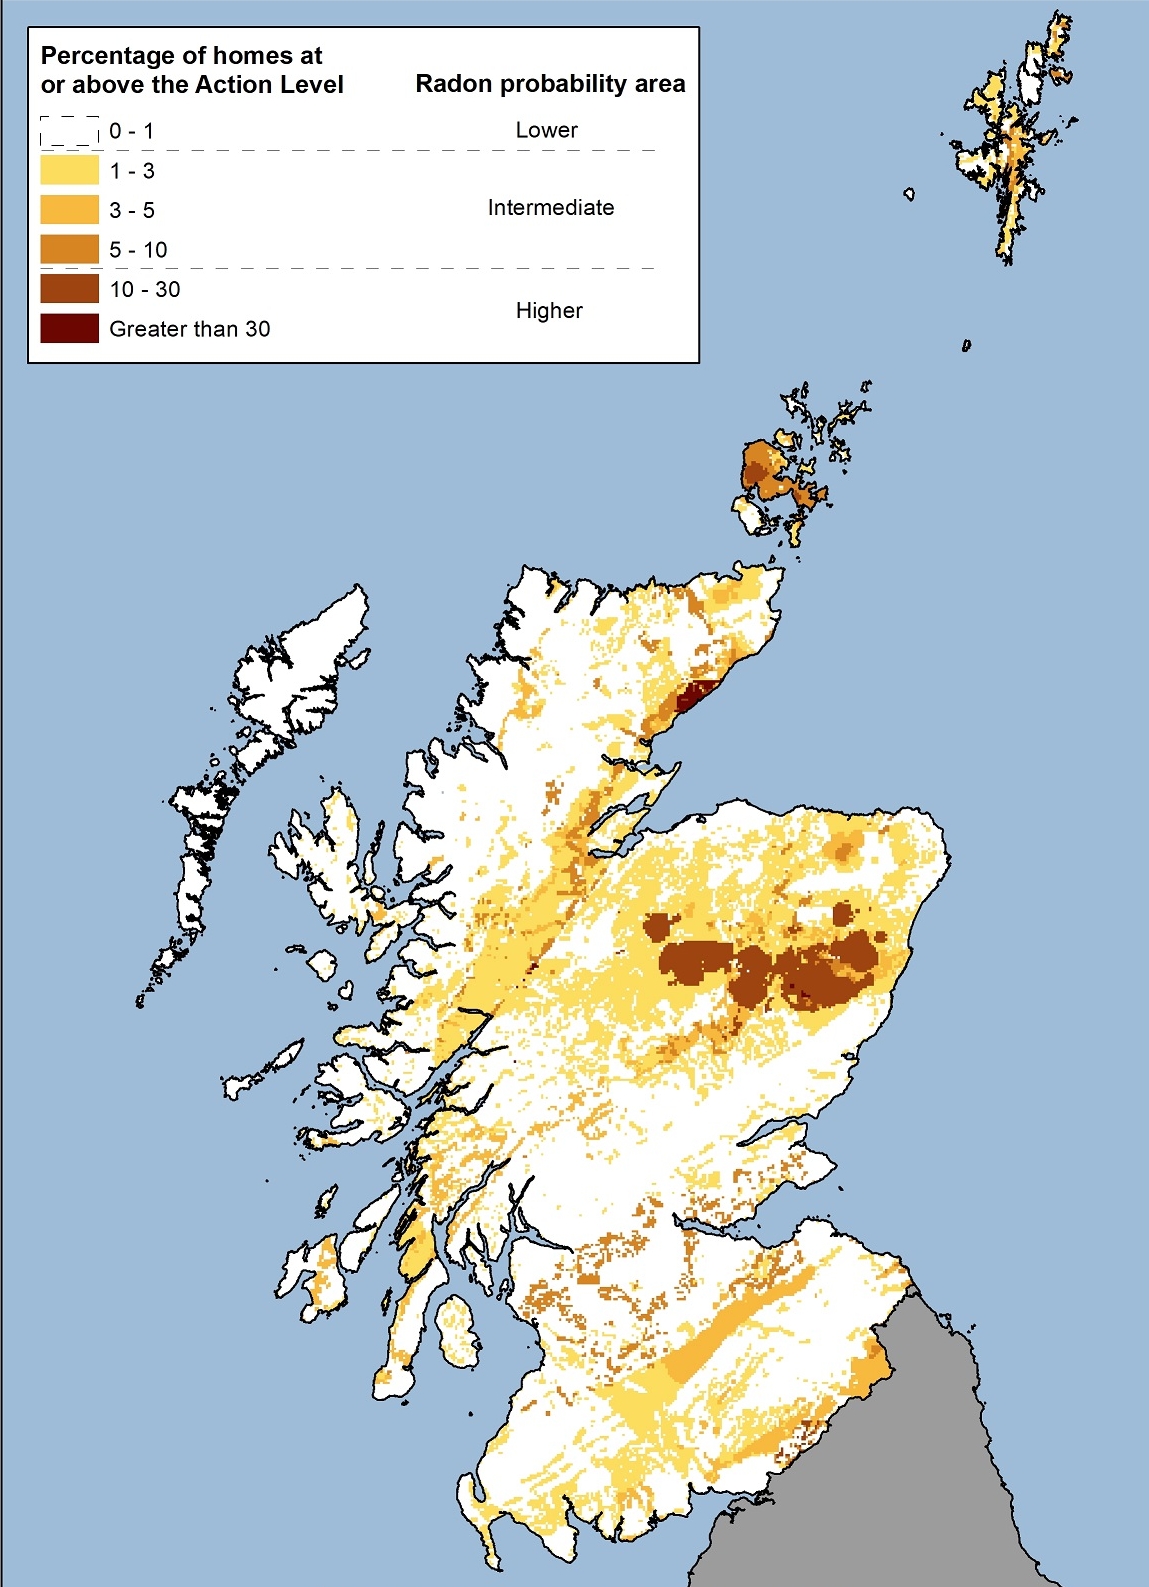 Map illustrating percentage of homes in Scotland at or above the level for action on Radon